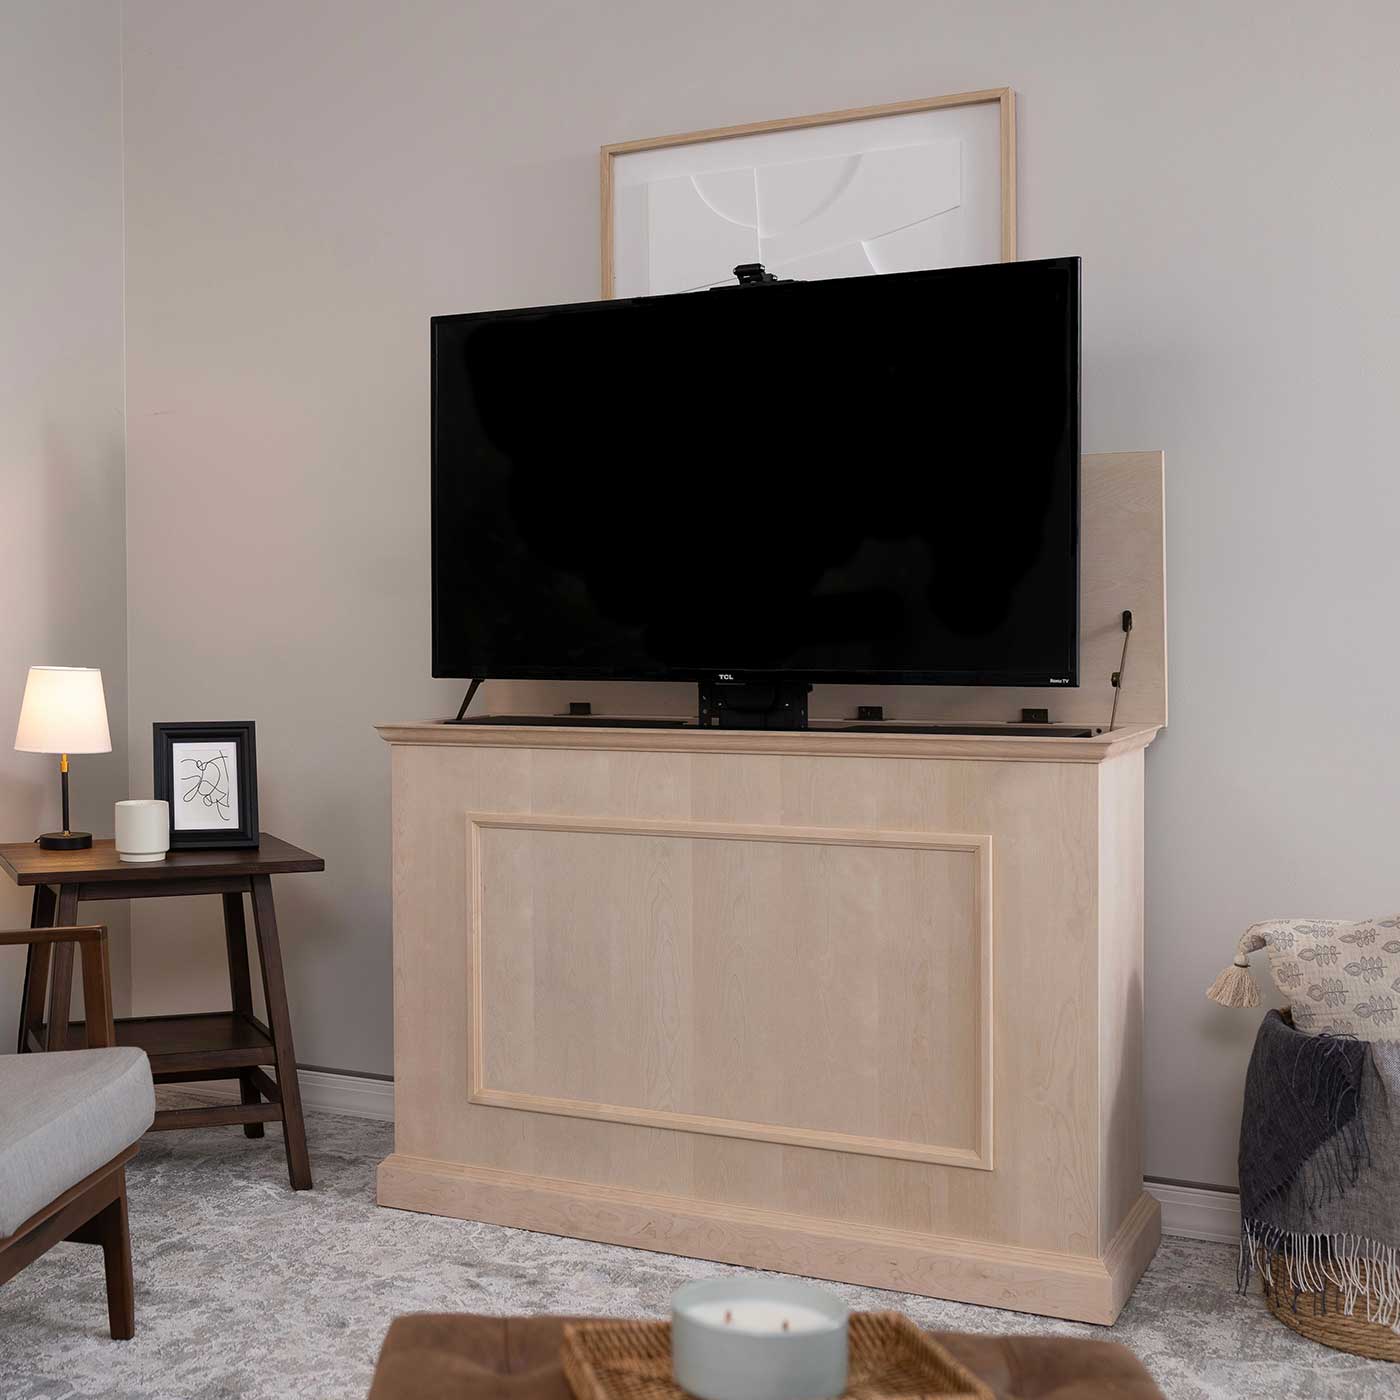 Touchstone Elevate 72012 TV Lift pictured in a living room with the cabinet opened fully.  